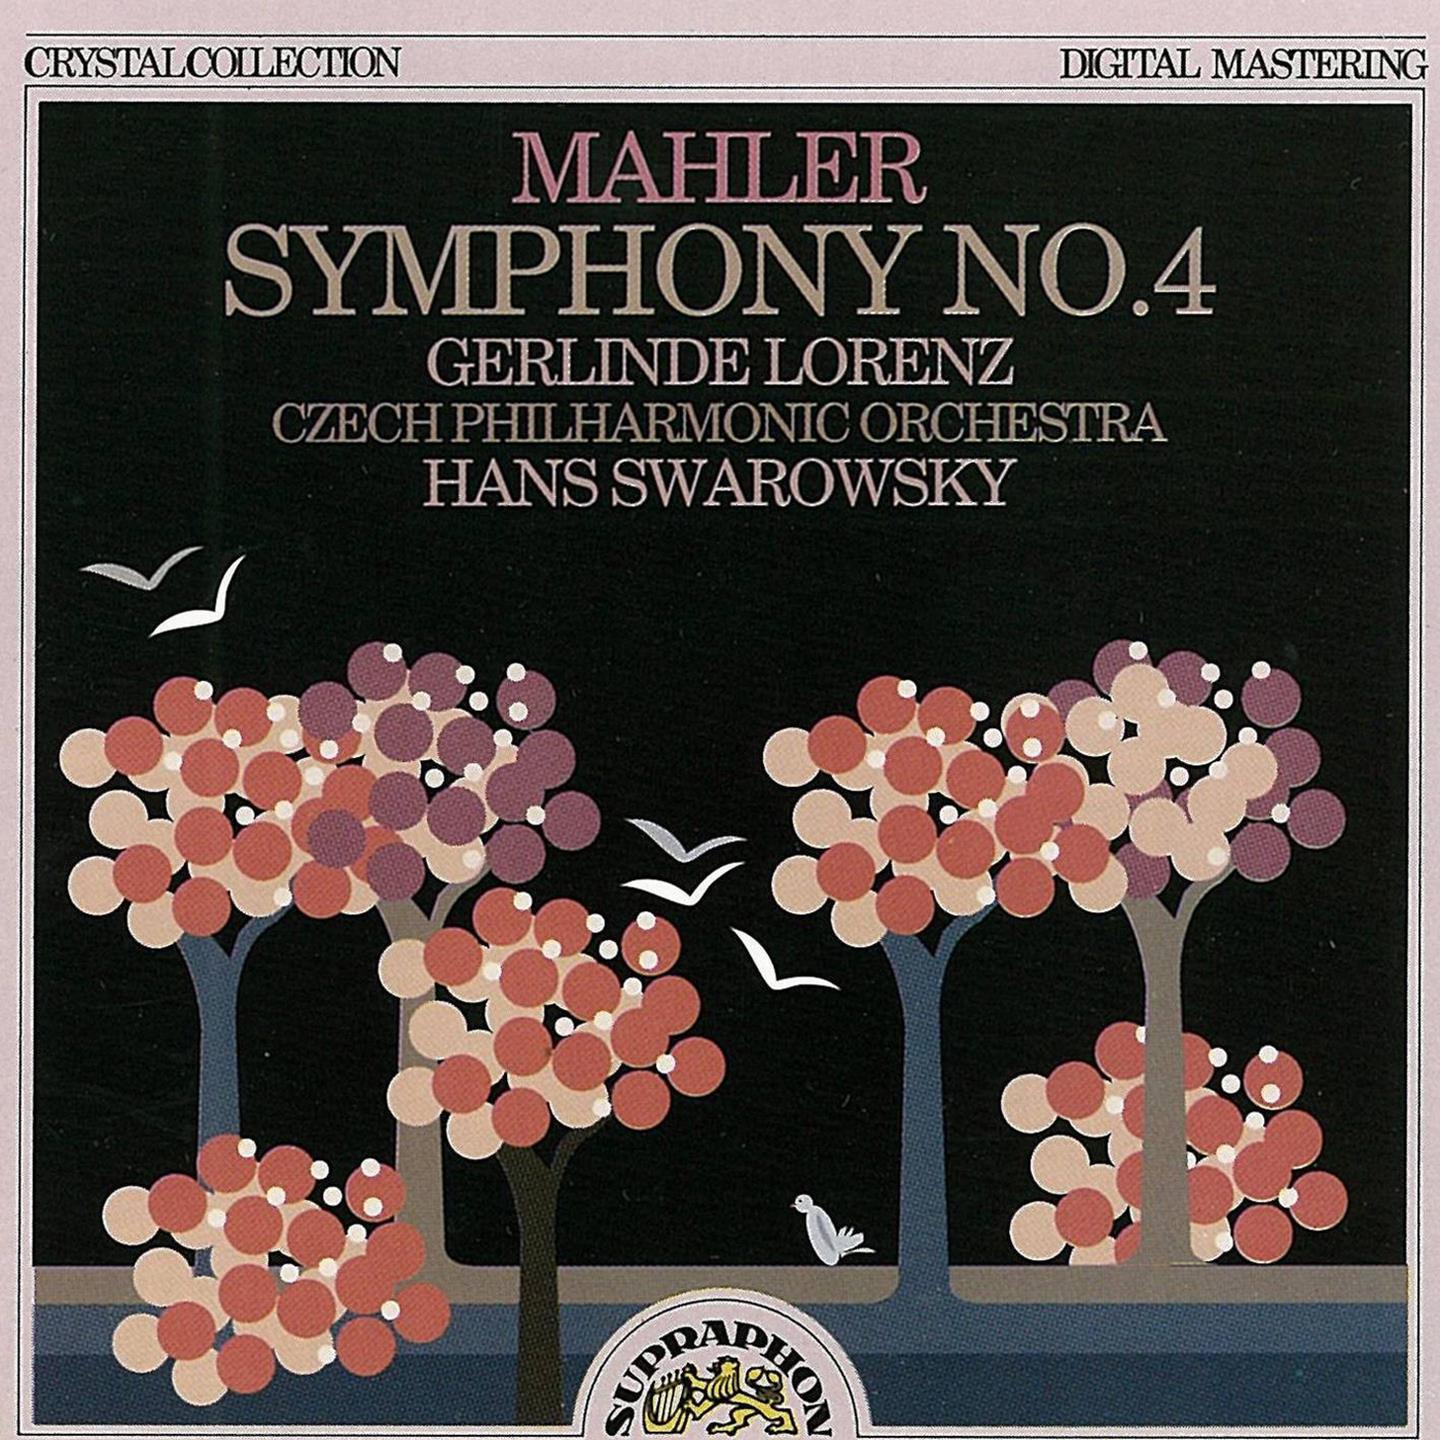 Symphony No. 4 in GSharp Major, .: I. Bed chtig. Nicht eilen. Moderately, Not Rushed